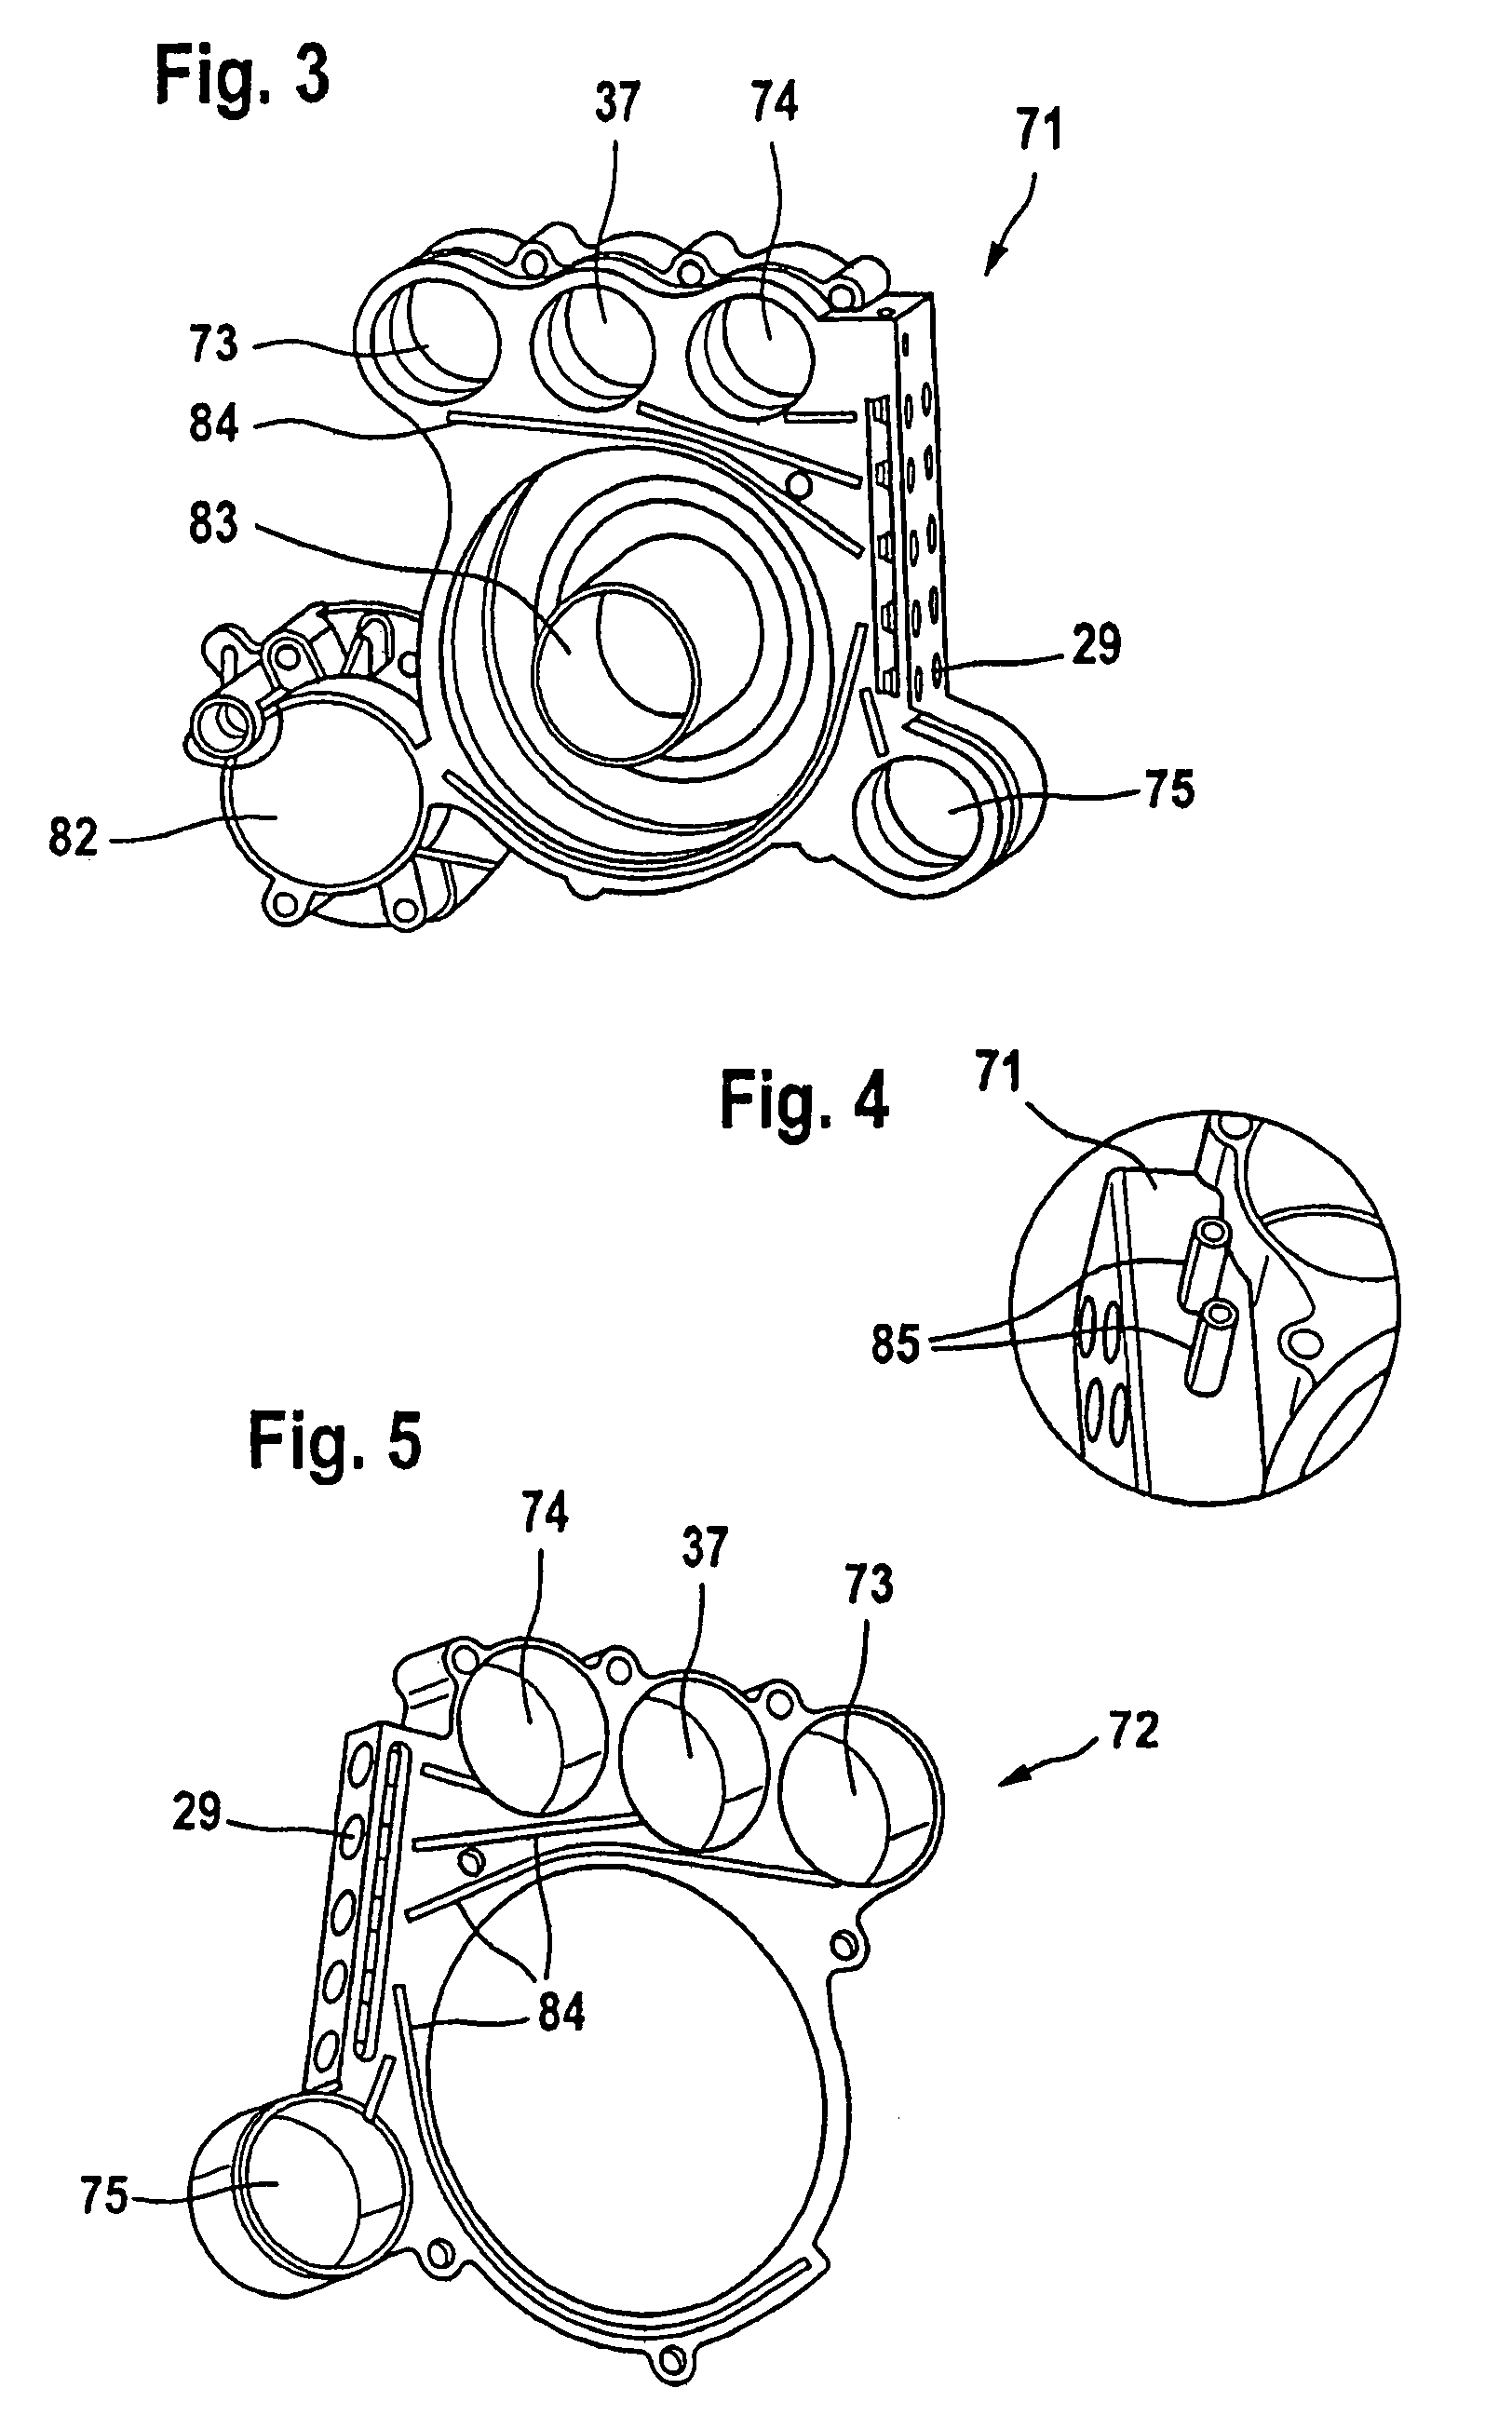 Gear shift module for an automatic transmission of a motor vehicle